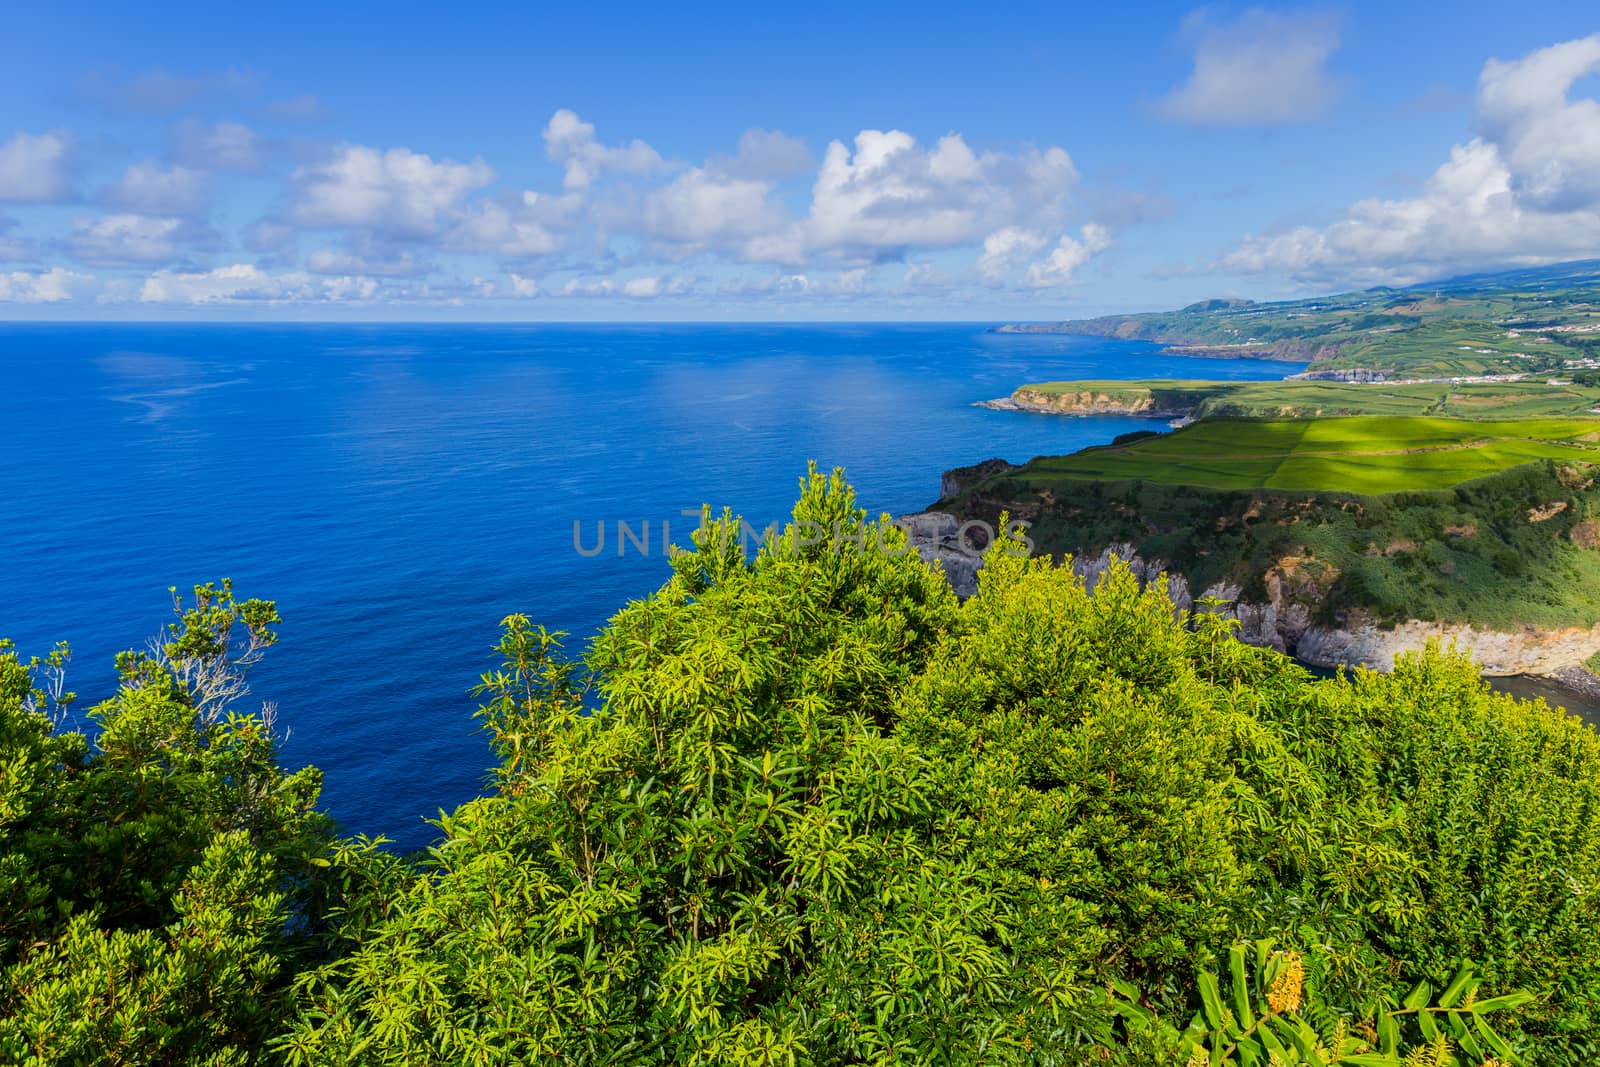 View from the Miradouro de Santa Iria on the island of São Miguel in the Azores. The view shows part of the northern coastline with beaches, cliffs and lush green fields on the clifftop.